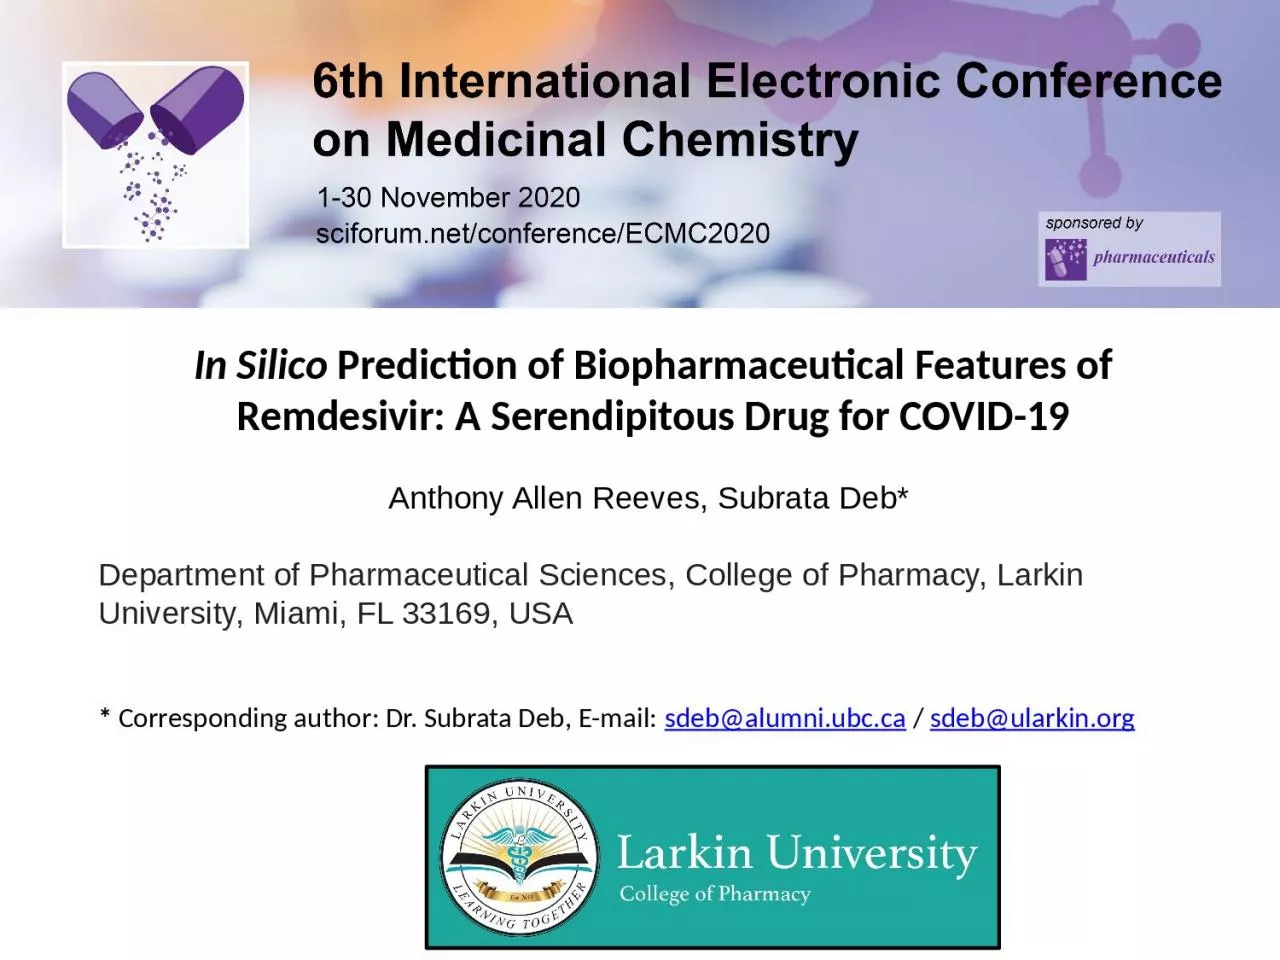 In Silico  Prediction of Biopharmaceutical Features of Remdesivir: A Serendipitous Drug